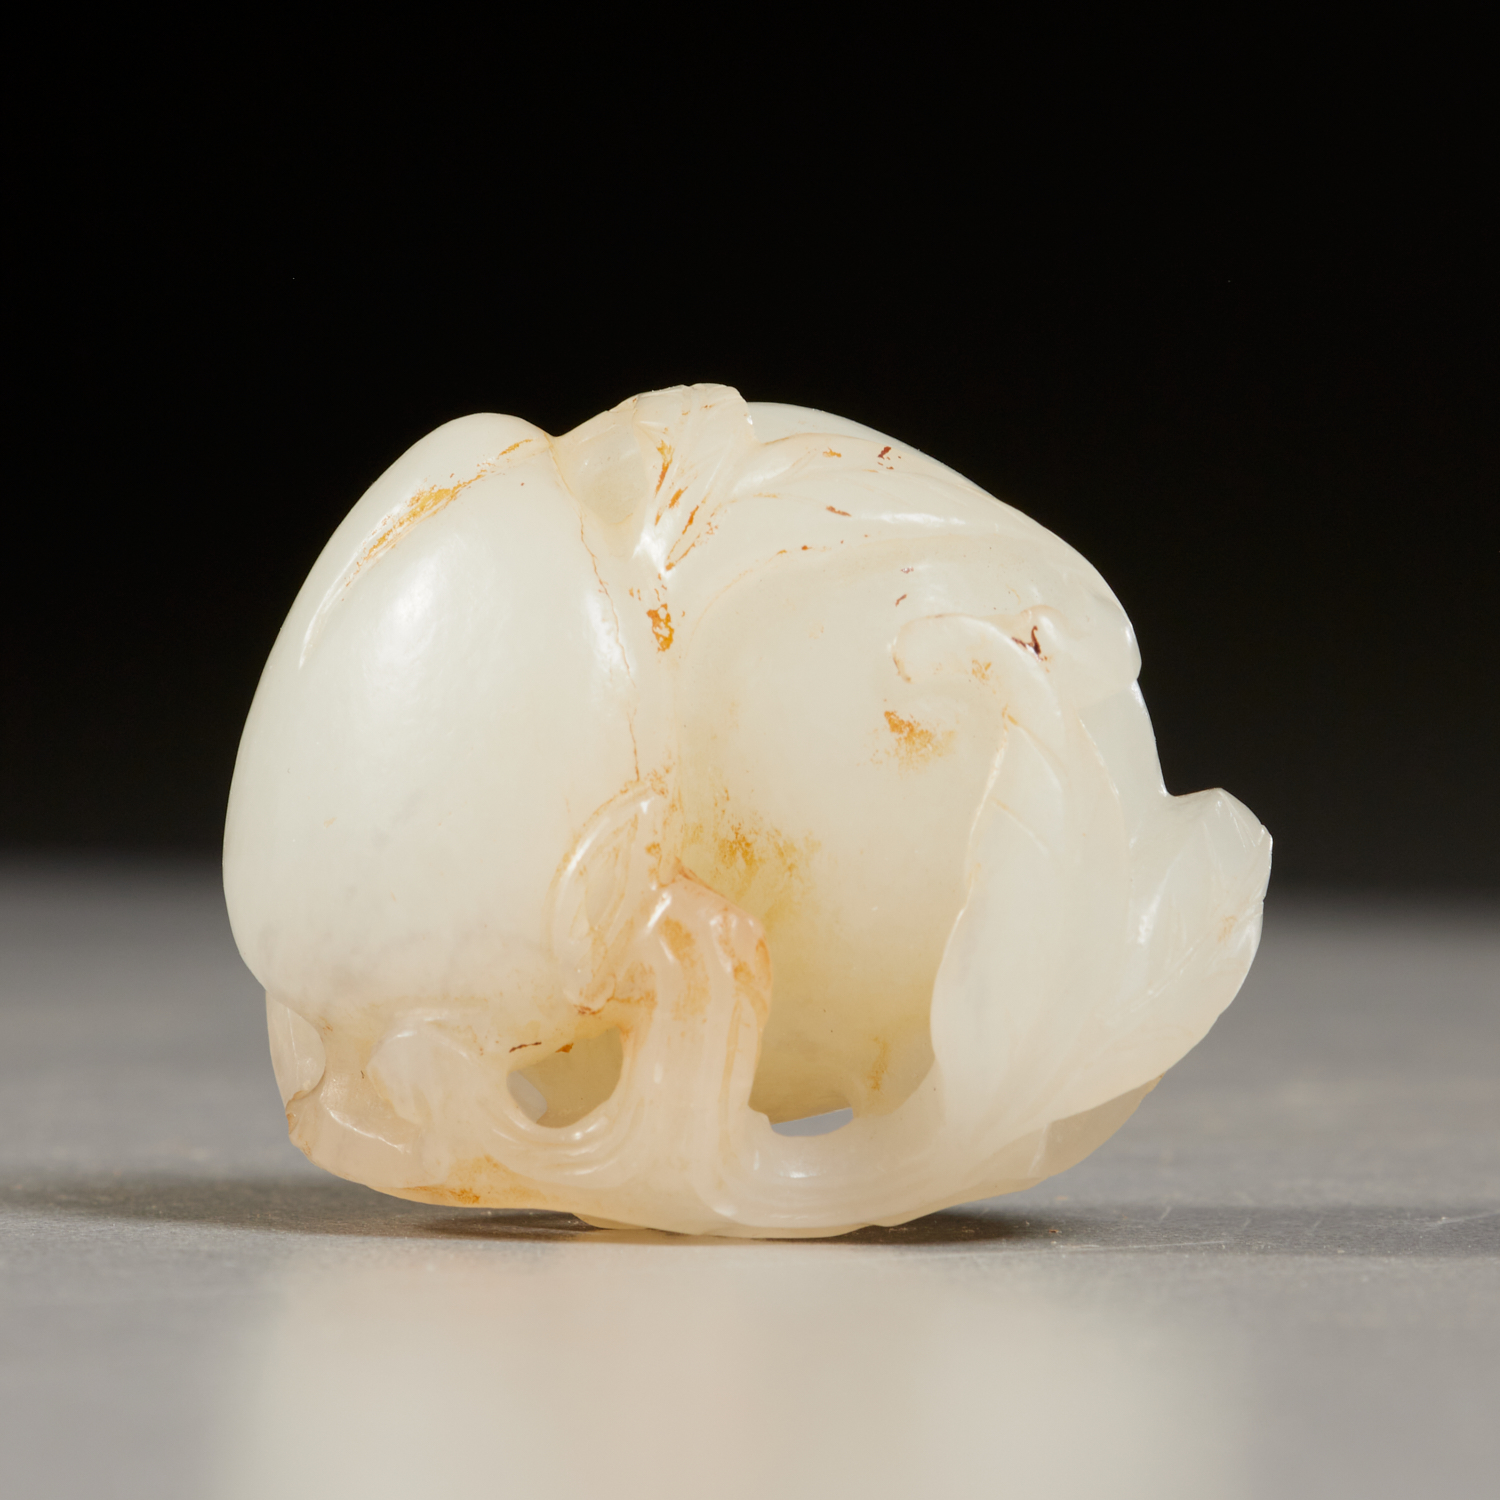 CHINESE CARVED WHITE JADE PEACH 2bf50d